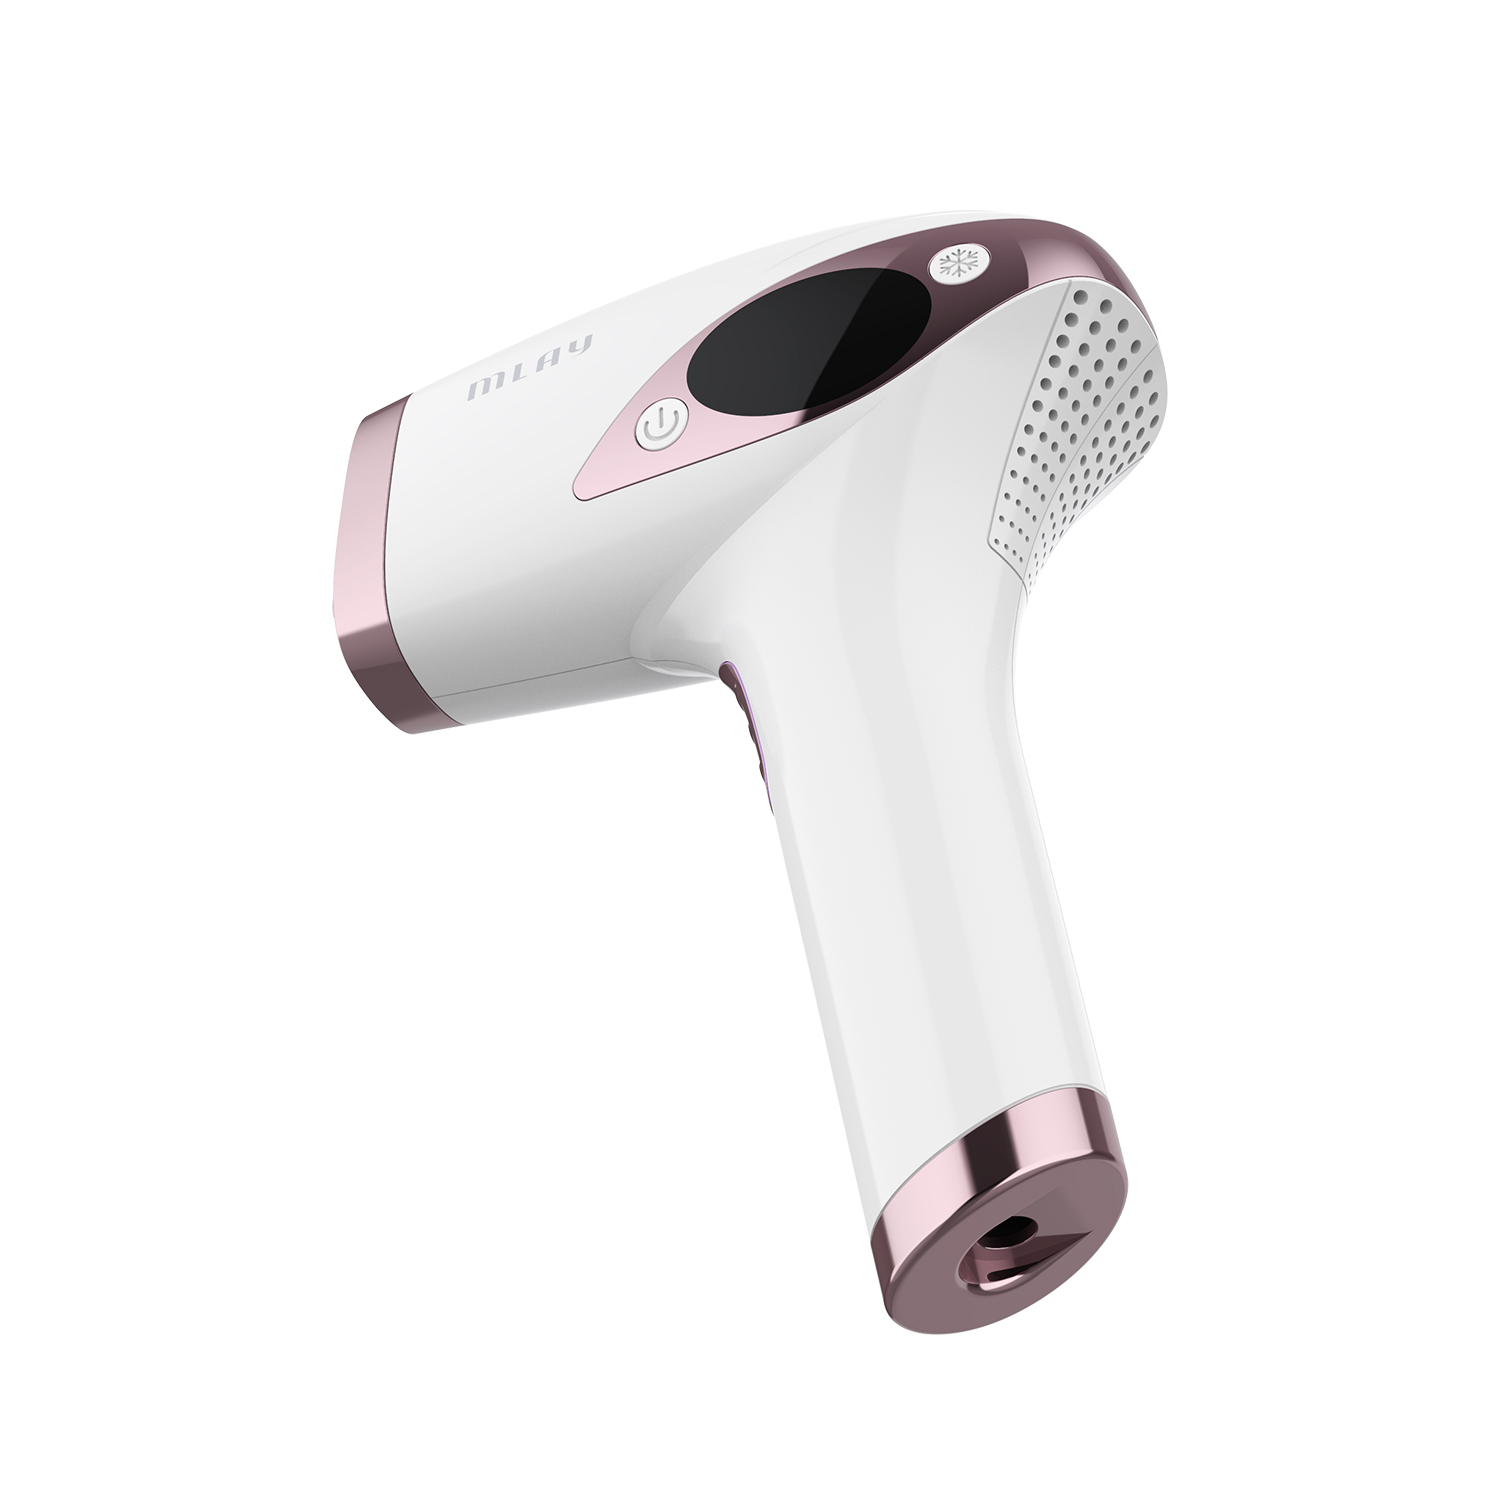 New Upgraded 500000 Flashes Ipl Laser Permanent Hair Removal Painless Epilator Ice Compress Hair Trimmer For Skin Care